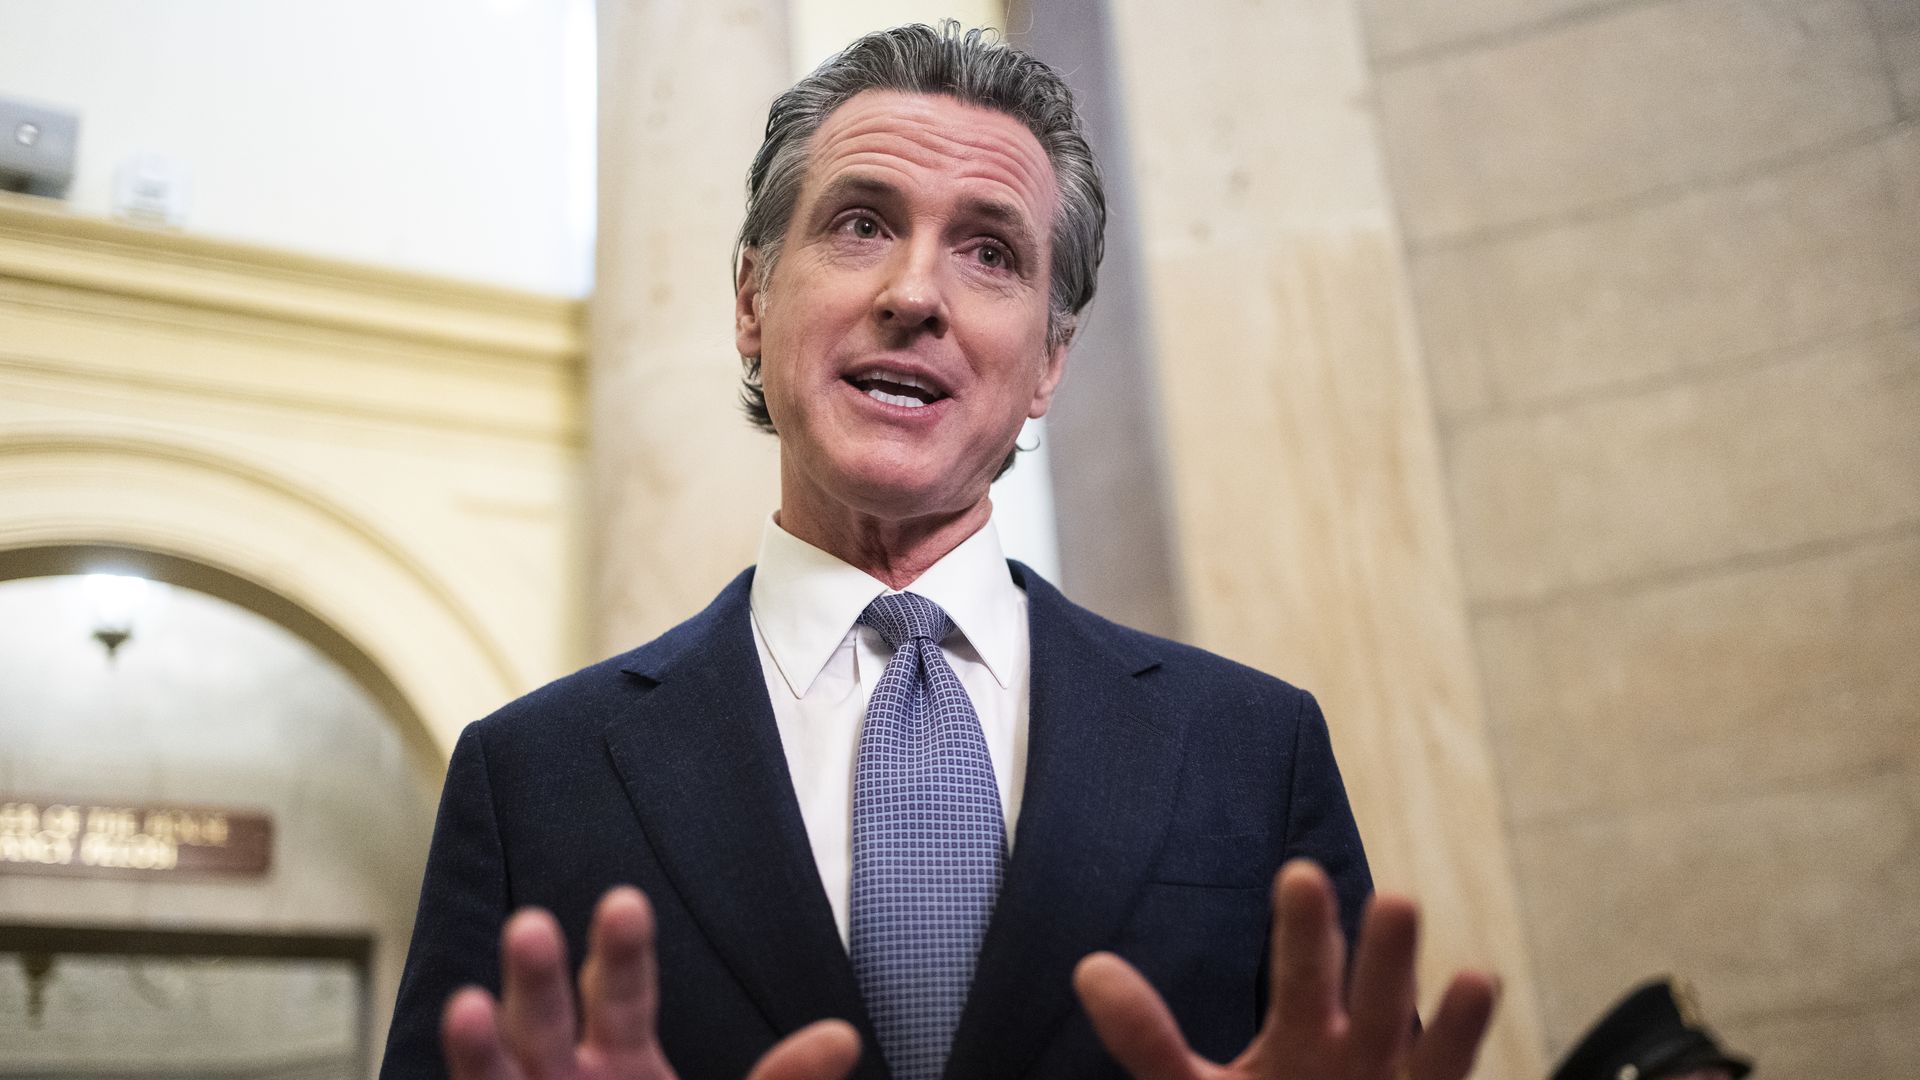 California Gov. Gavin Newsom (D) talks with reporters after a meeting with Speaker of the House Nancy Pelosi, D-Calif.